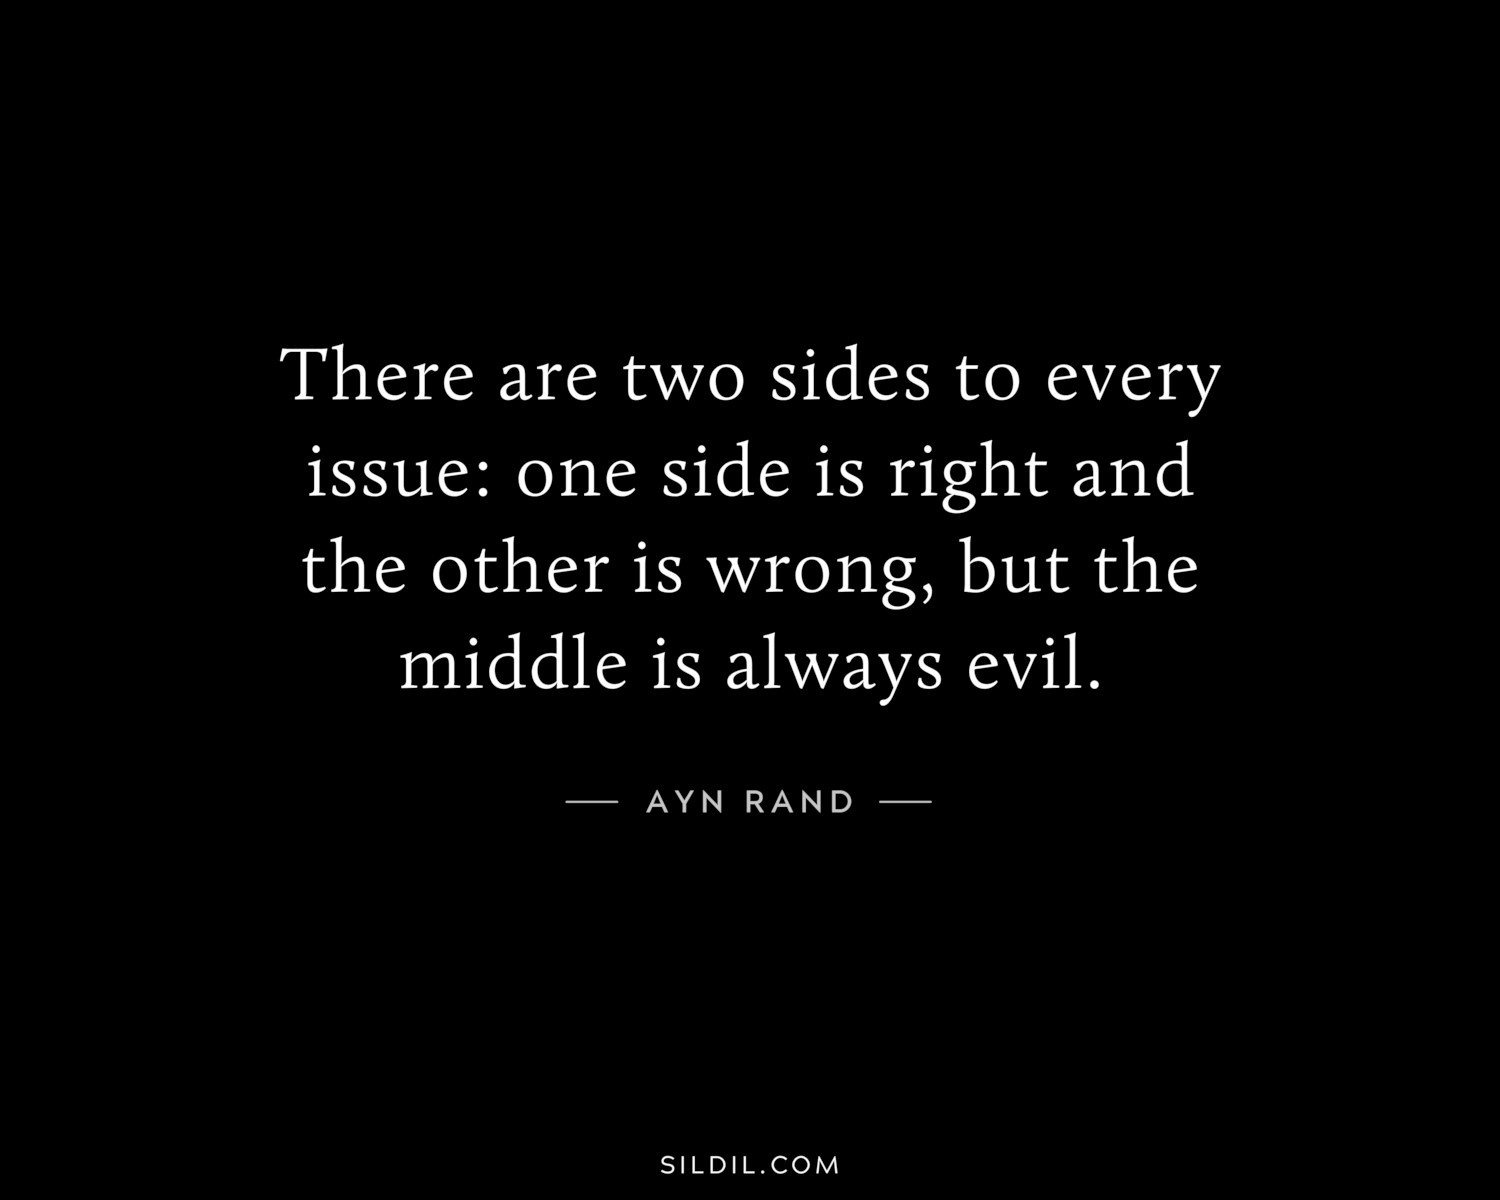 There are two sides to every issue: one side is right and the other is wrong, but the middle is always evil.